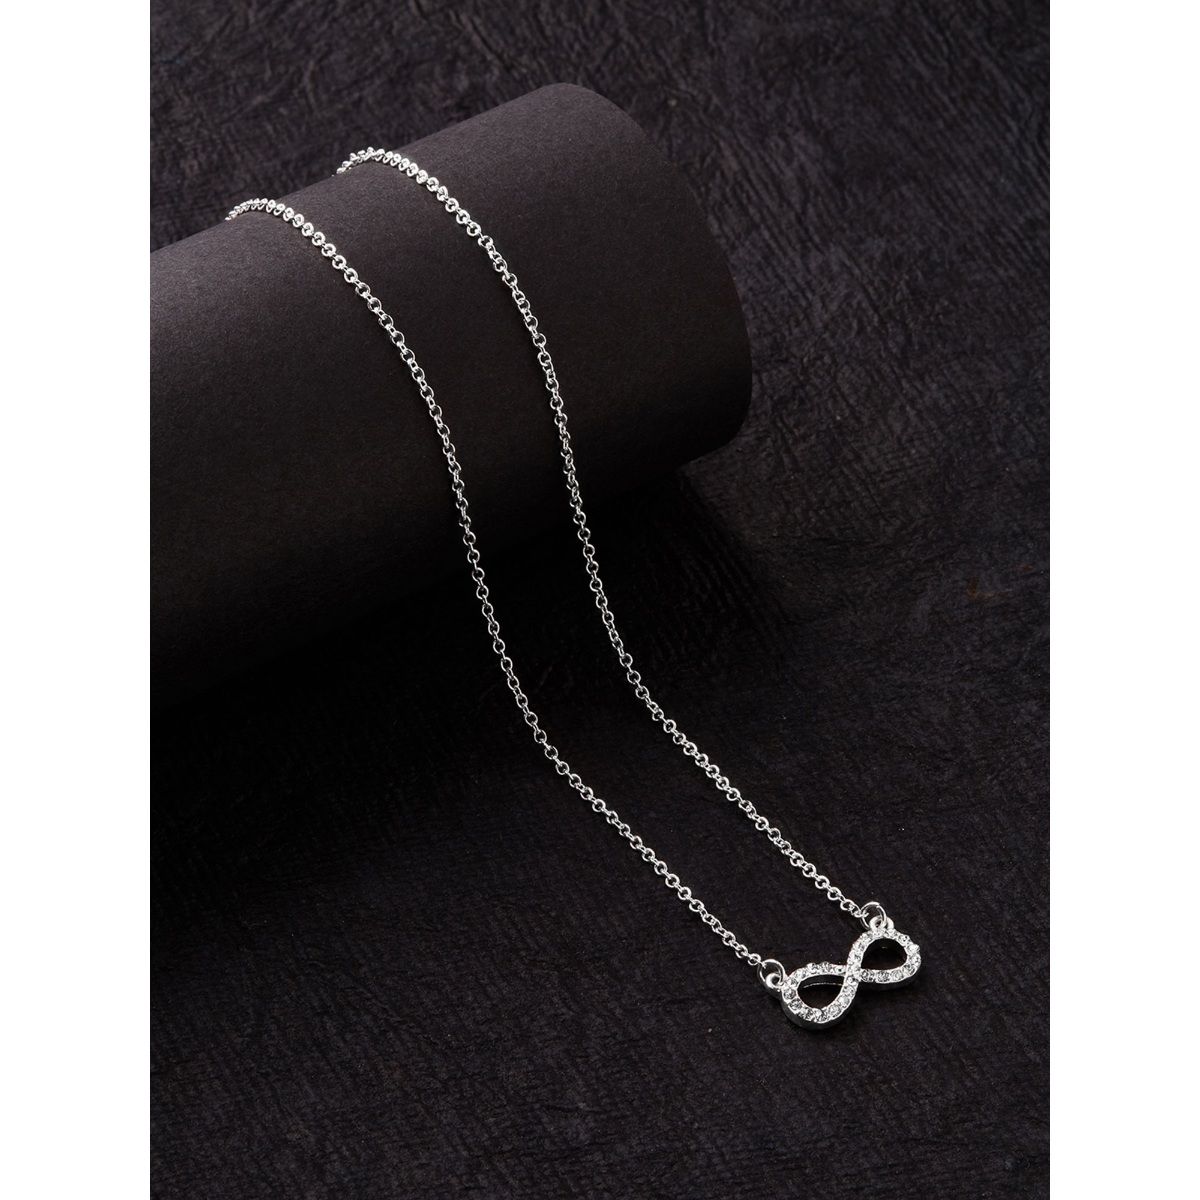 Buy Sterling Silver Three Generations Interlocking Circles 16+2 Eternity  Necklace Online at Lowest Price Ever in India | Check Reviews & Ratings -  Shop The World